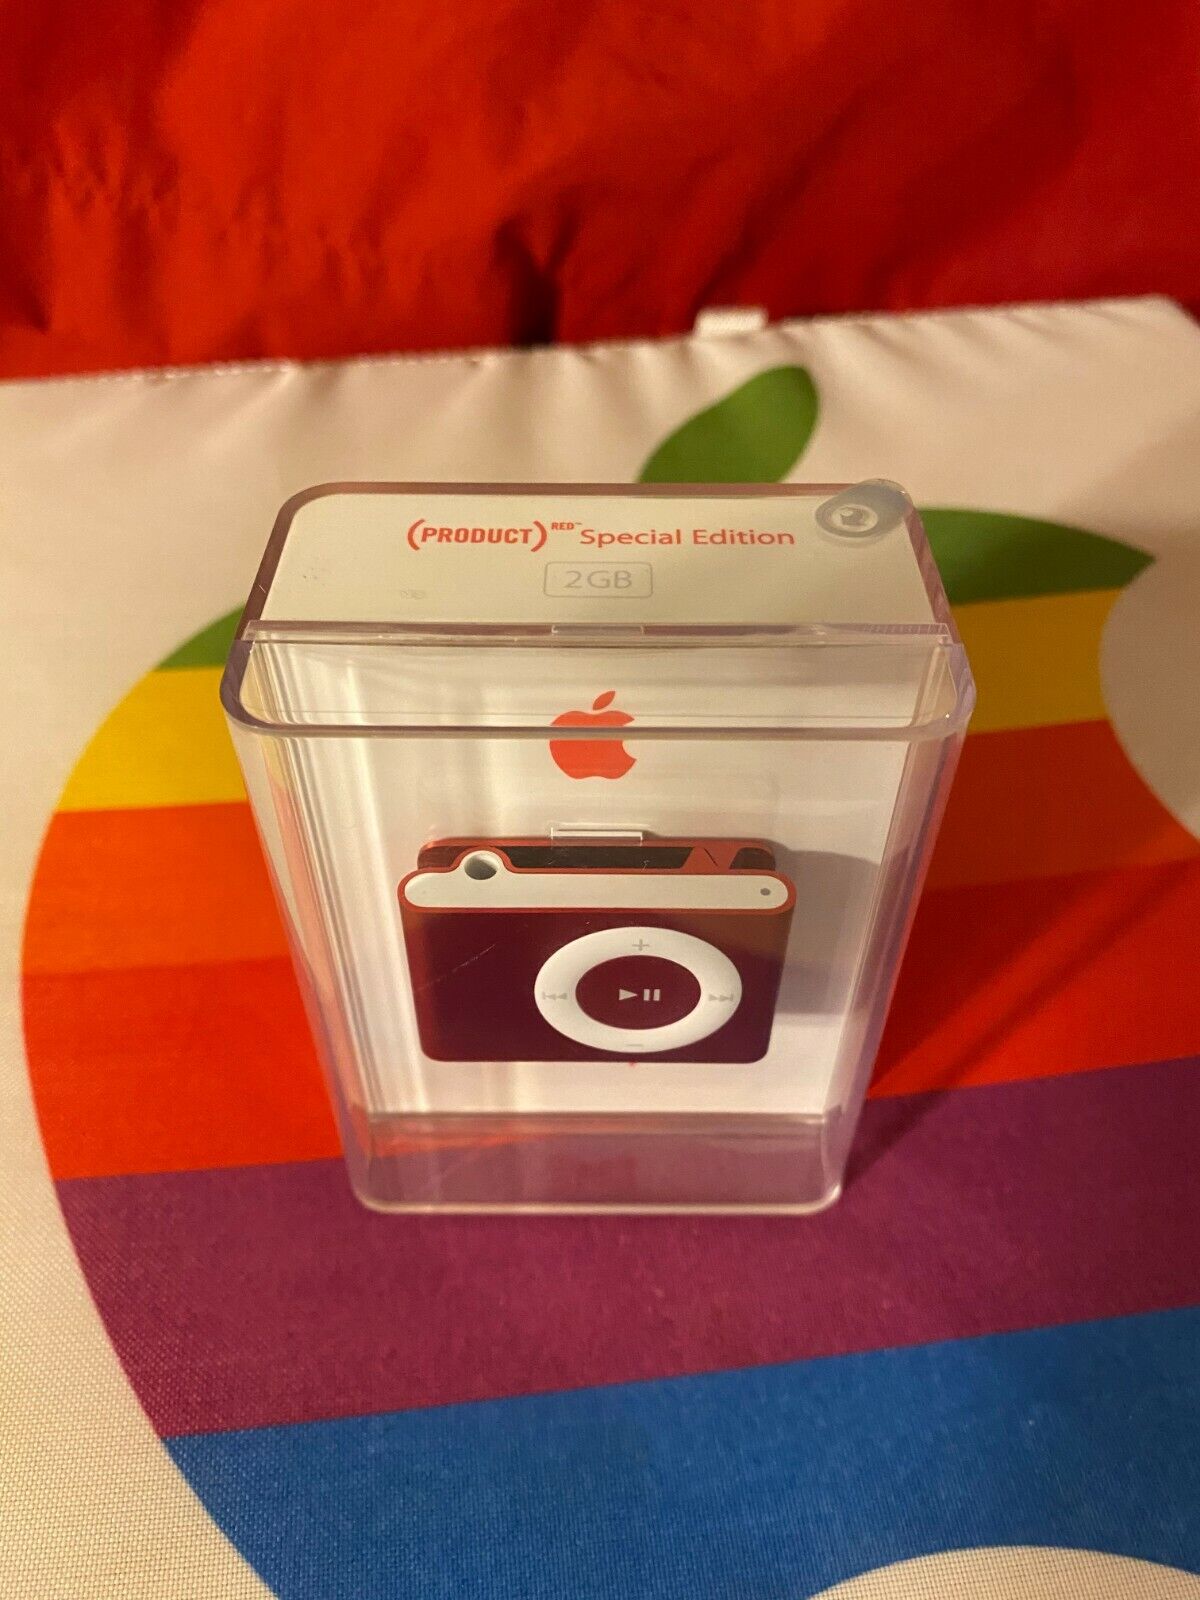 RARE SEALED NEW OOP APPLE iPod SHUFFLE 2 GB PRODUCT RED Special EDITION (RED)